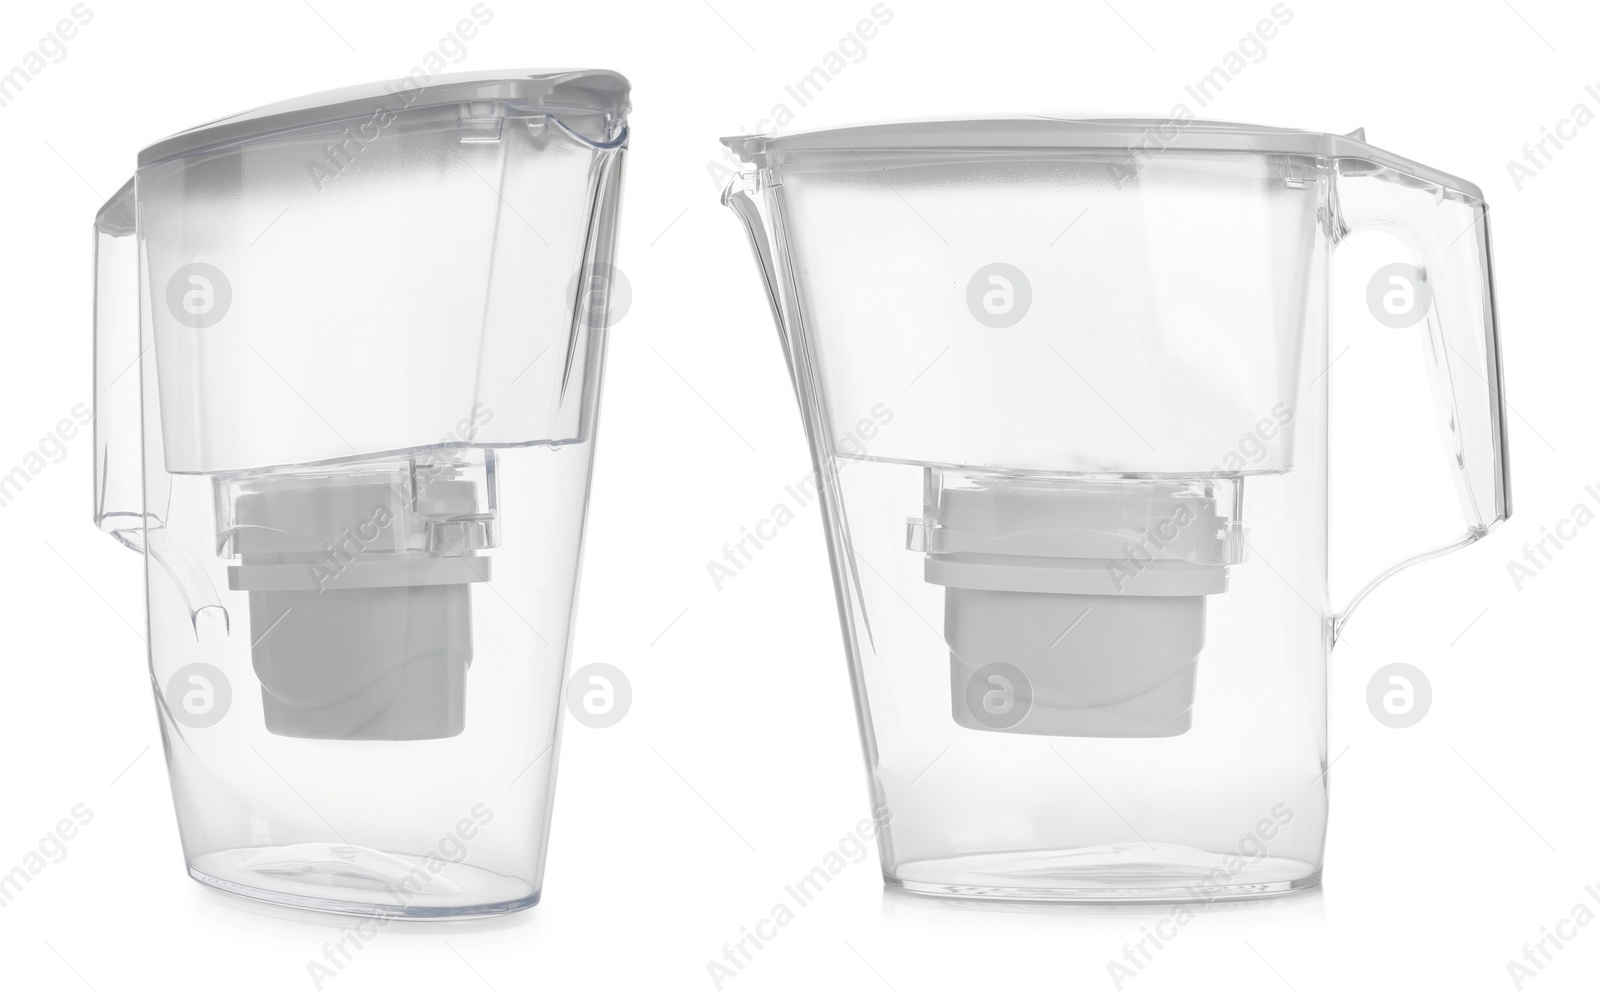 Image of Empty water filter jugs on white background, collage